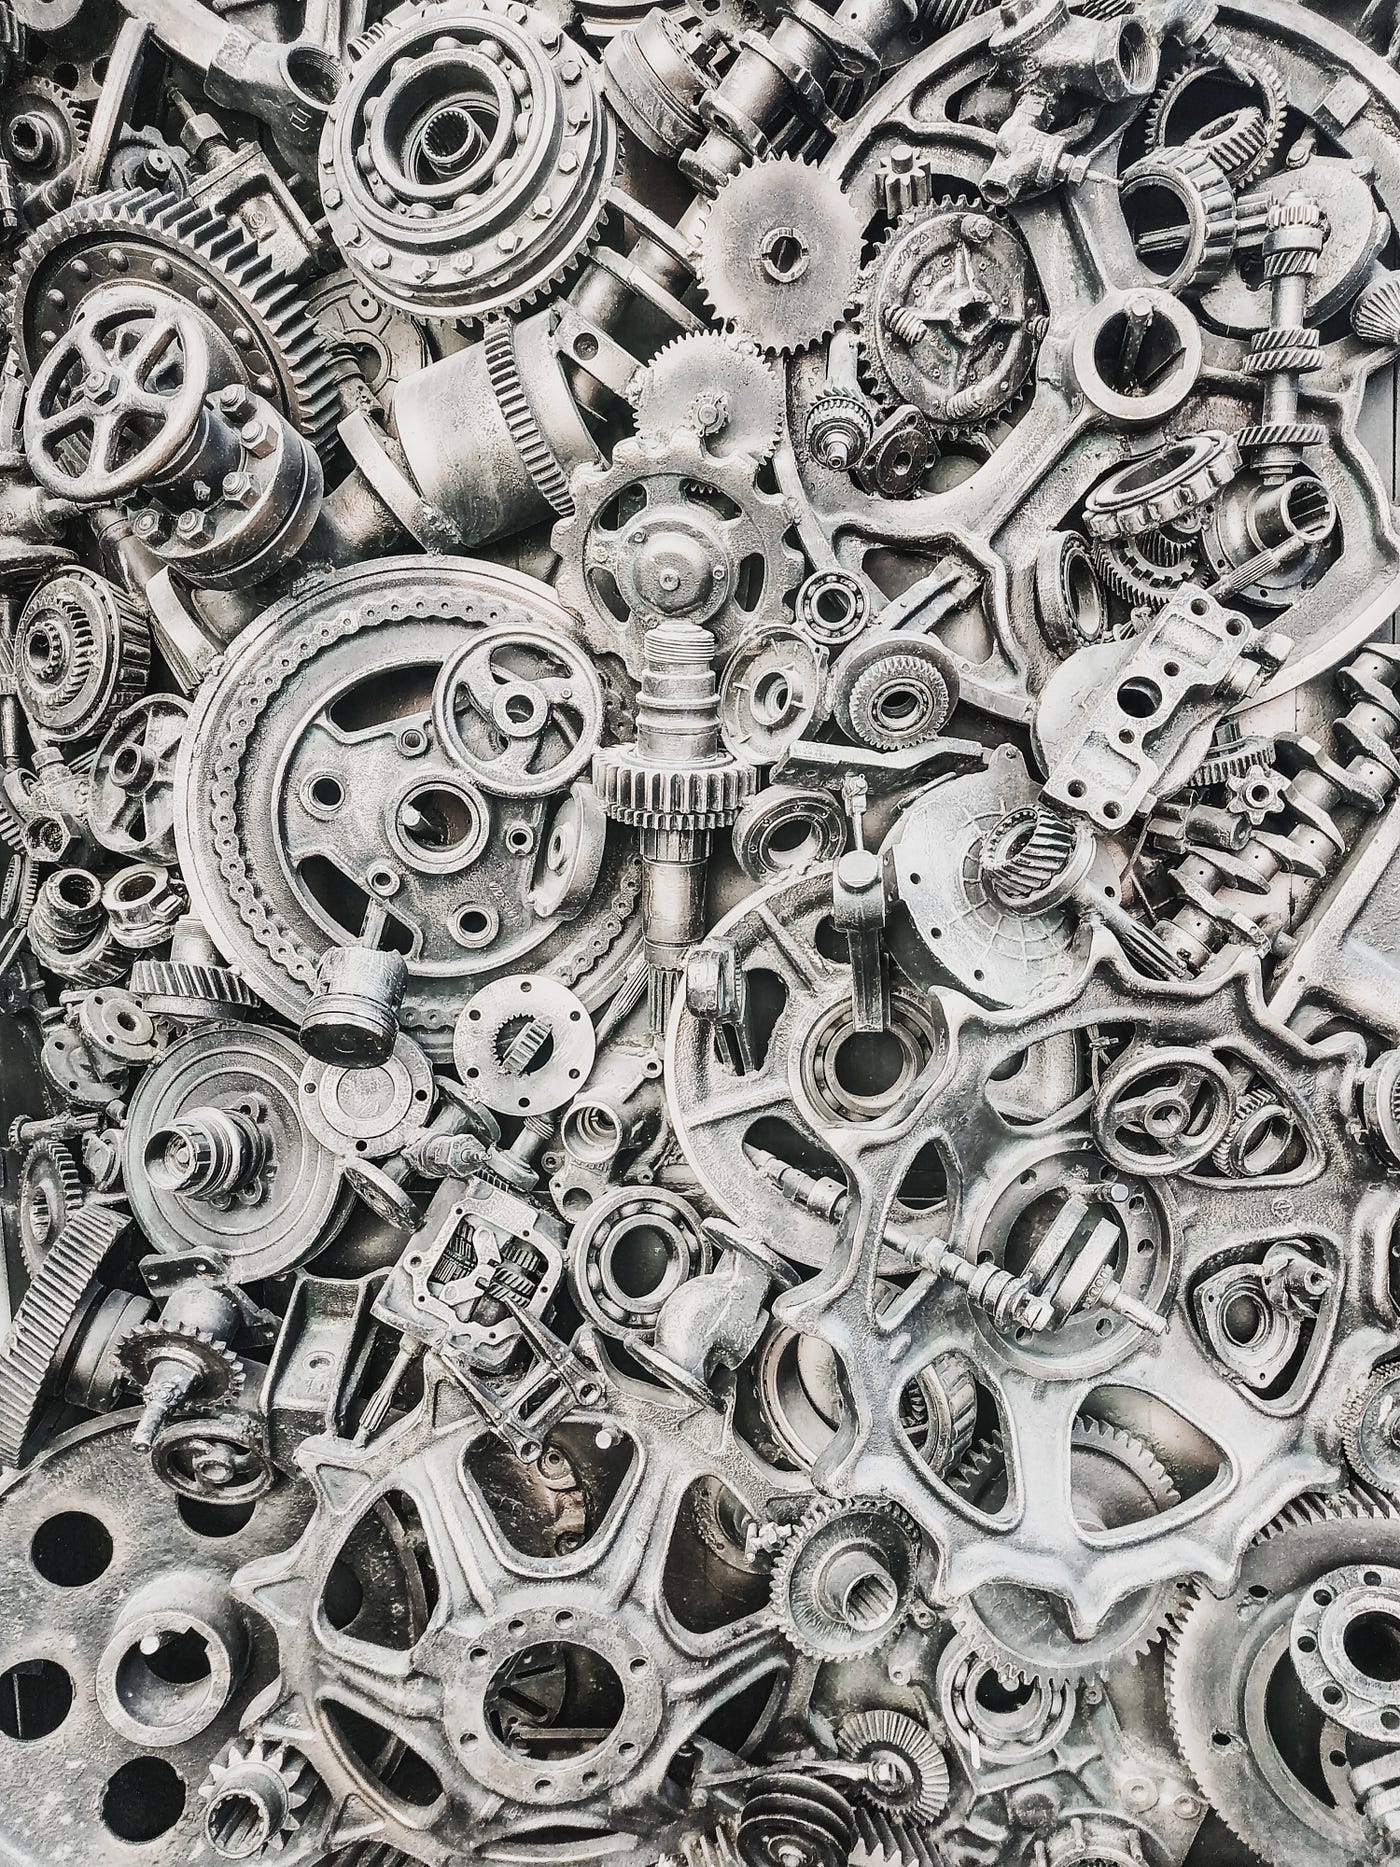 Gears and other metallic objects crowded together